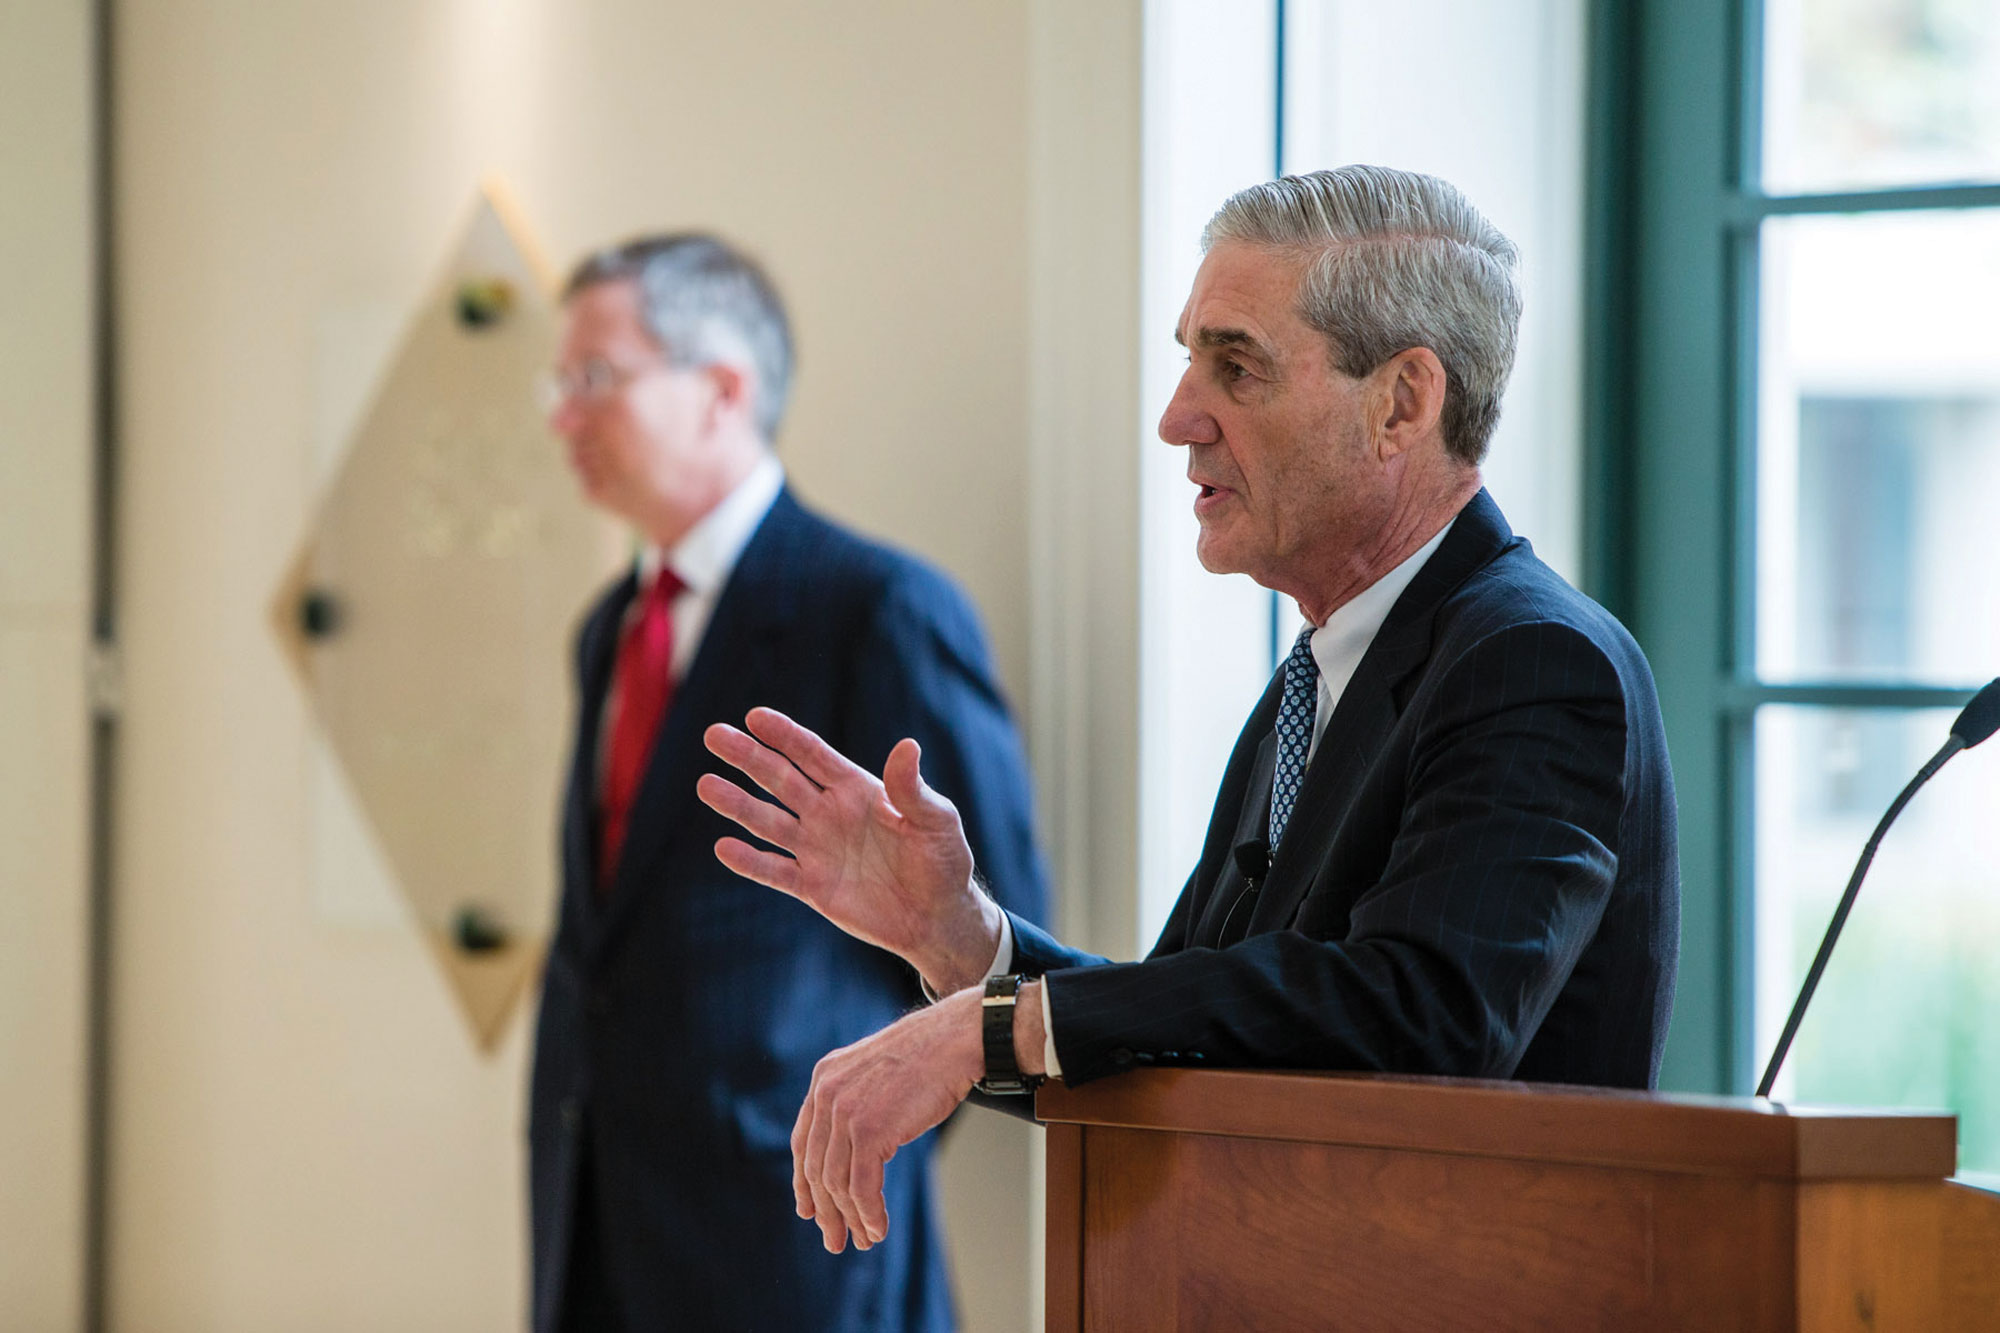 Robert Mueller speaking to an audience at a podium